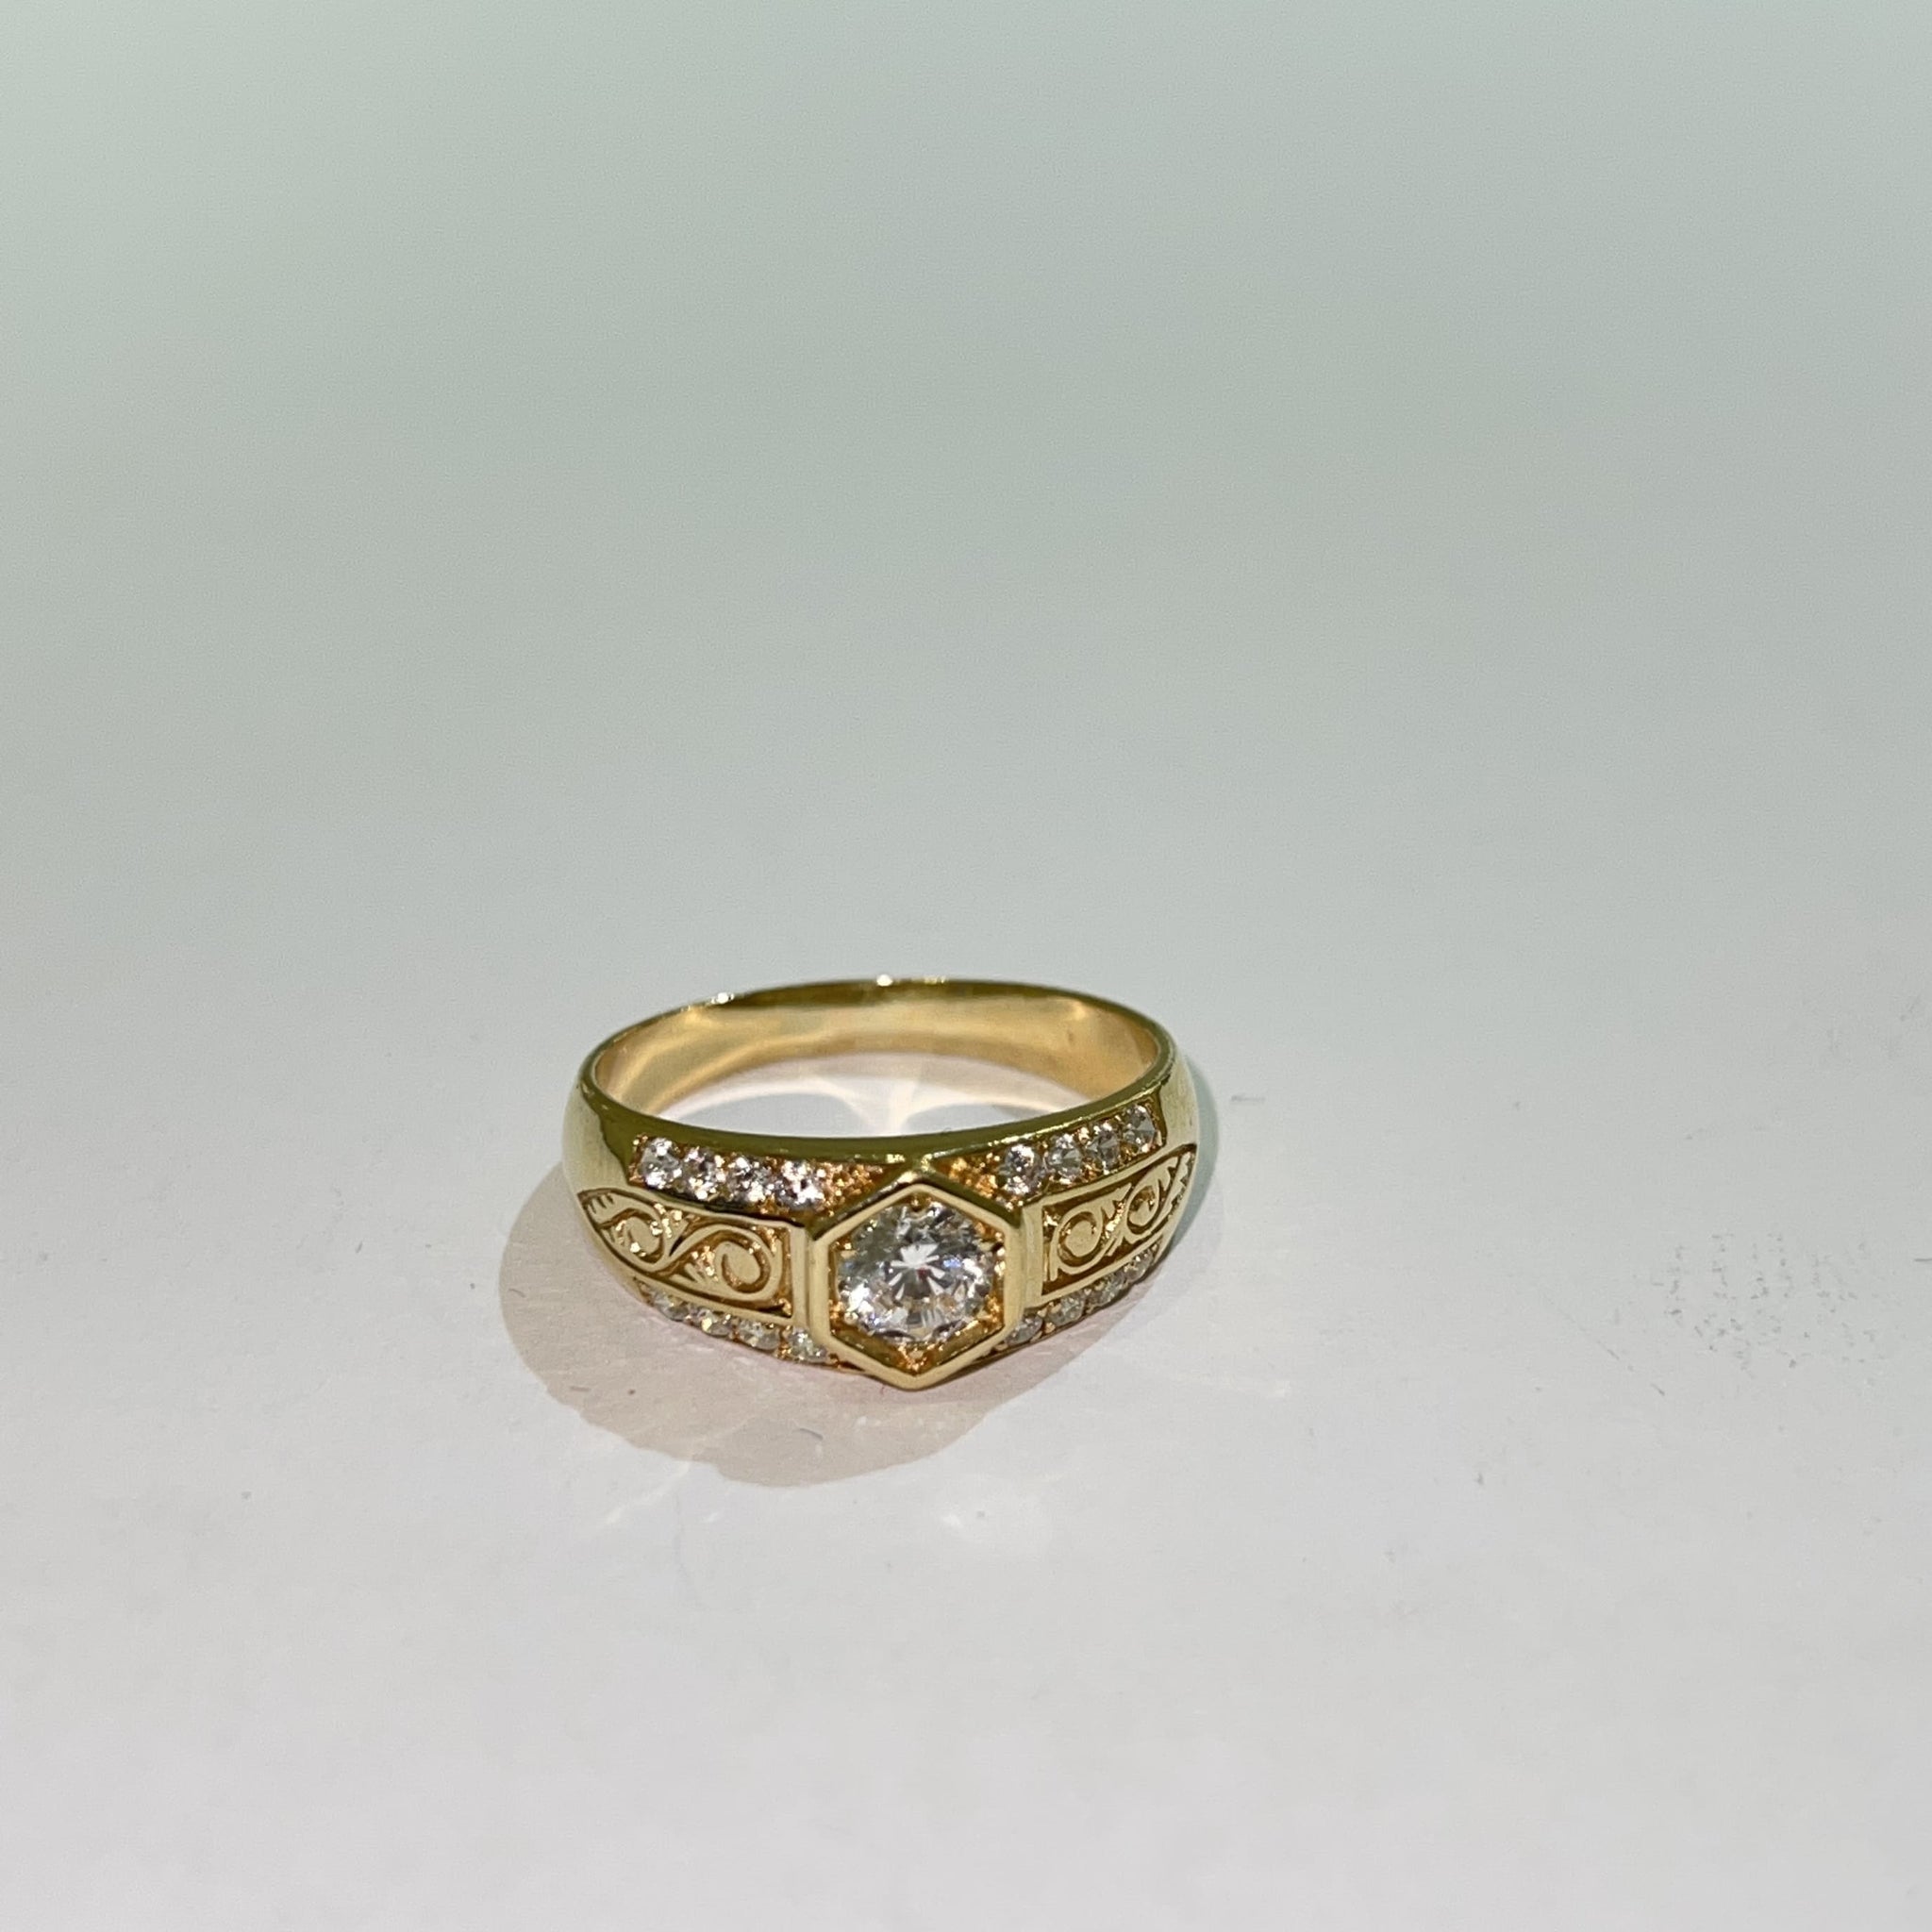 Deluxe Ring - 14 carat gold